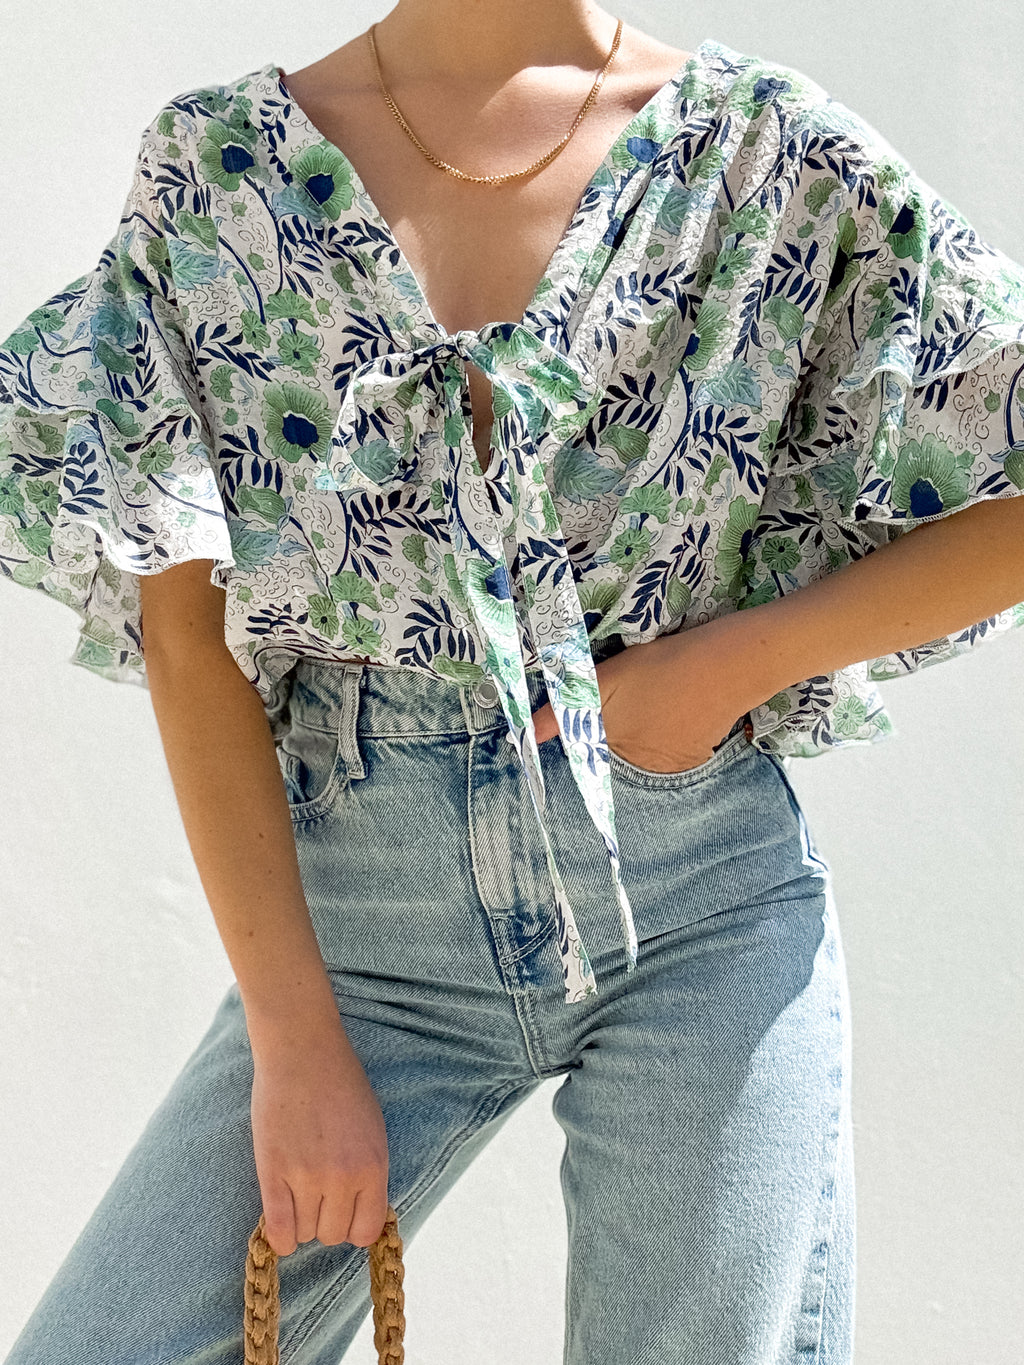 Floral Frenzy Ruffle Top - Stitch And Feather